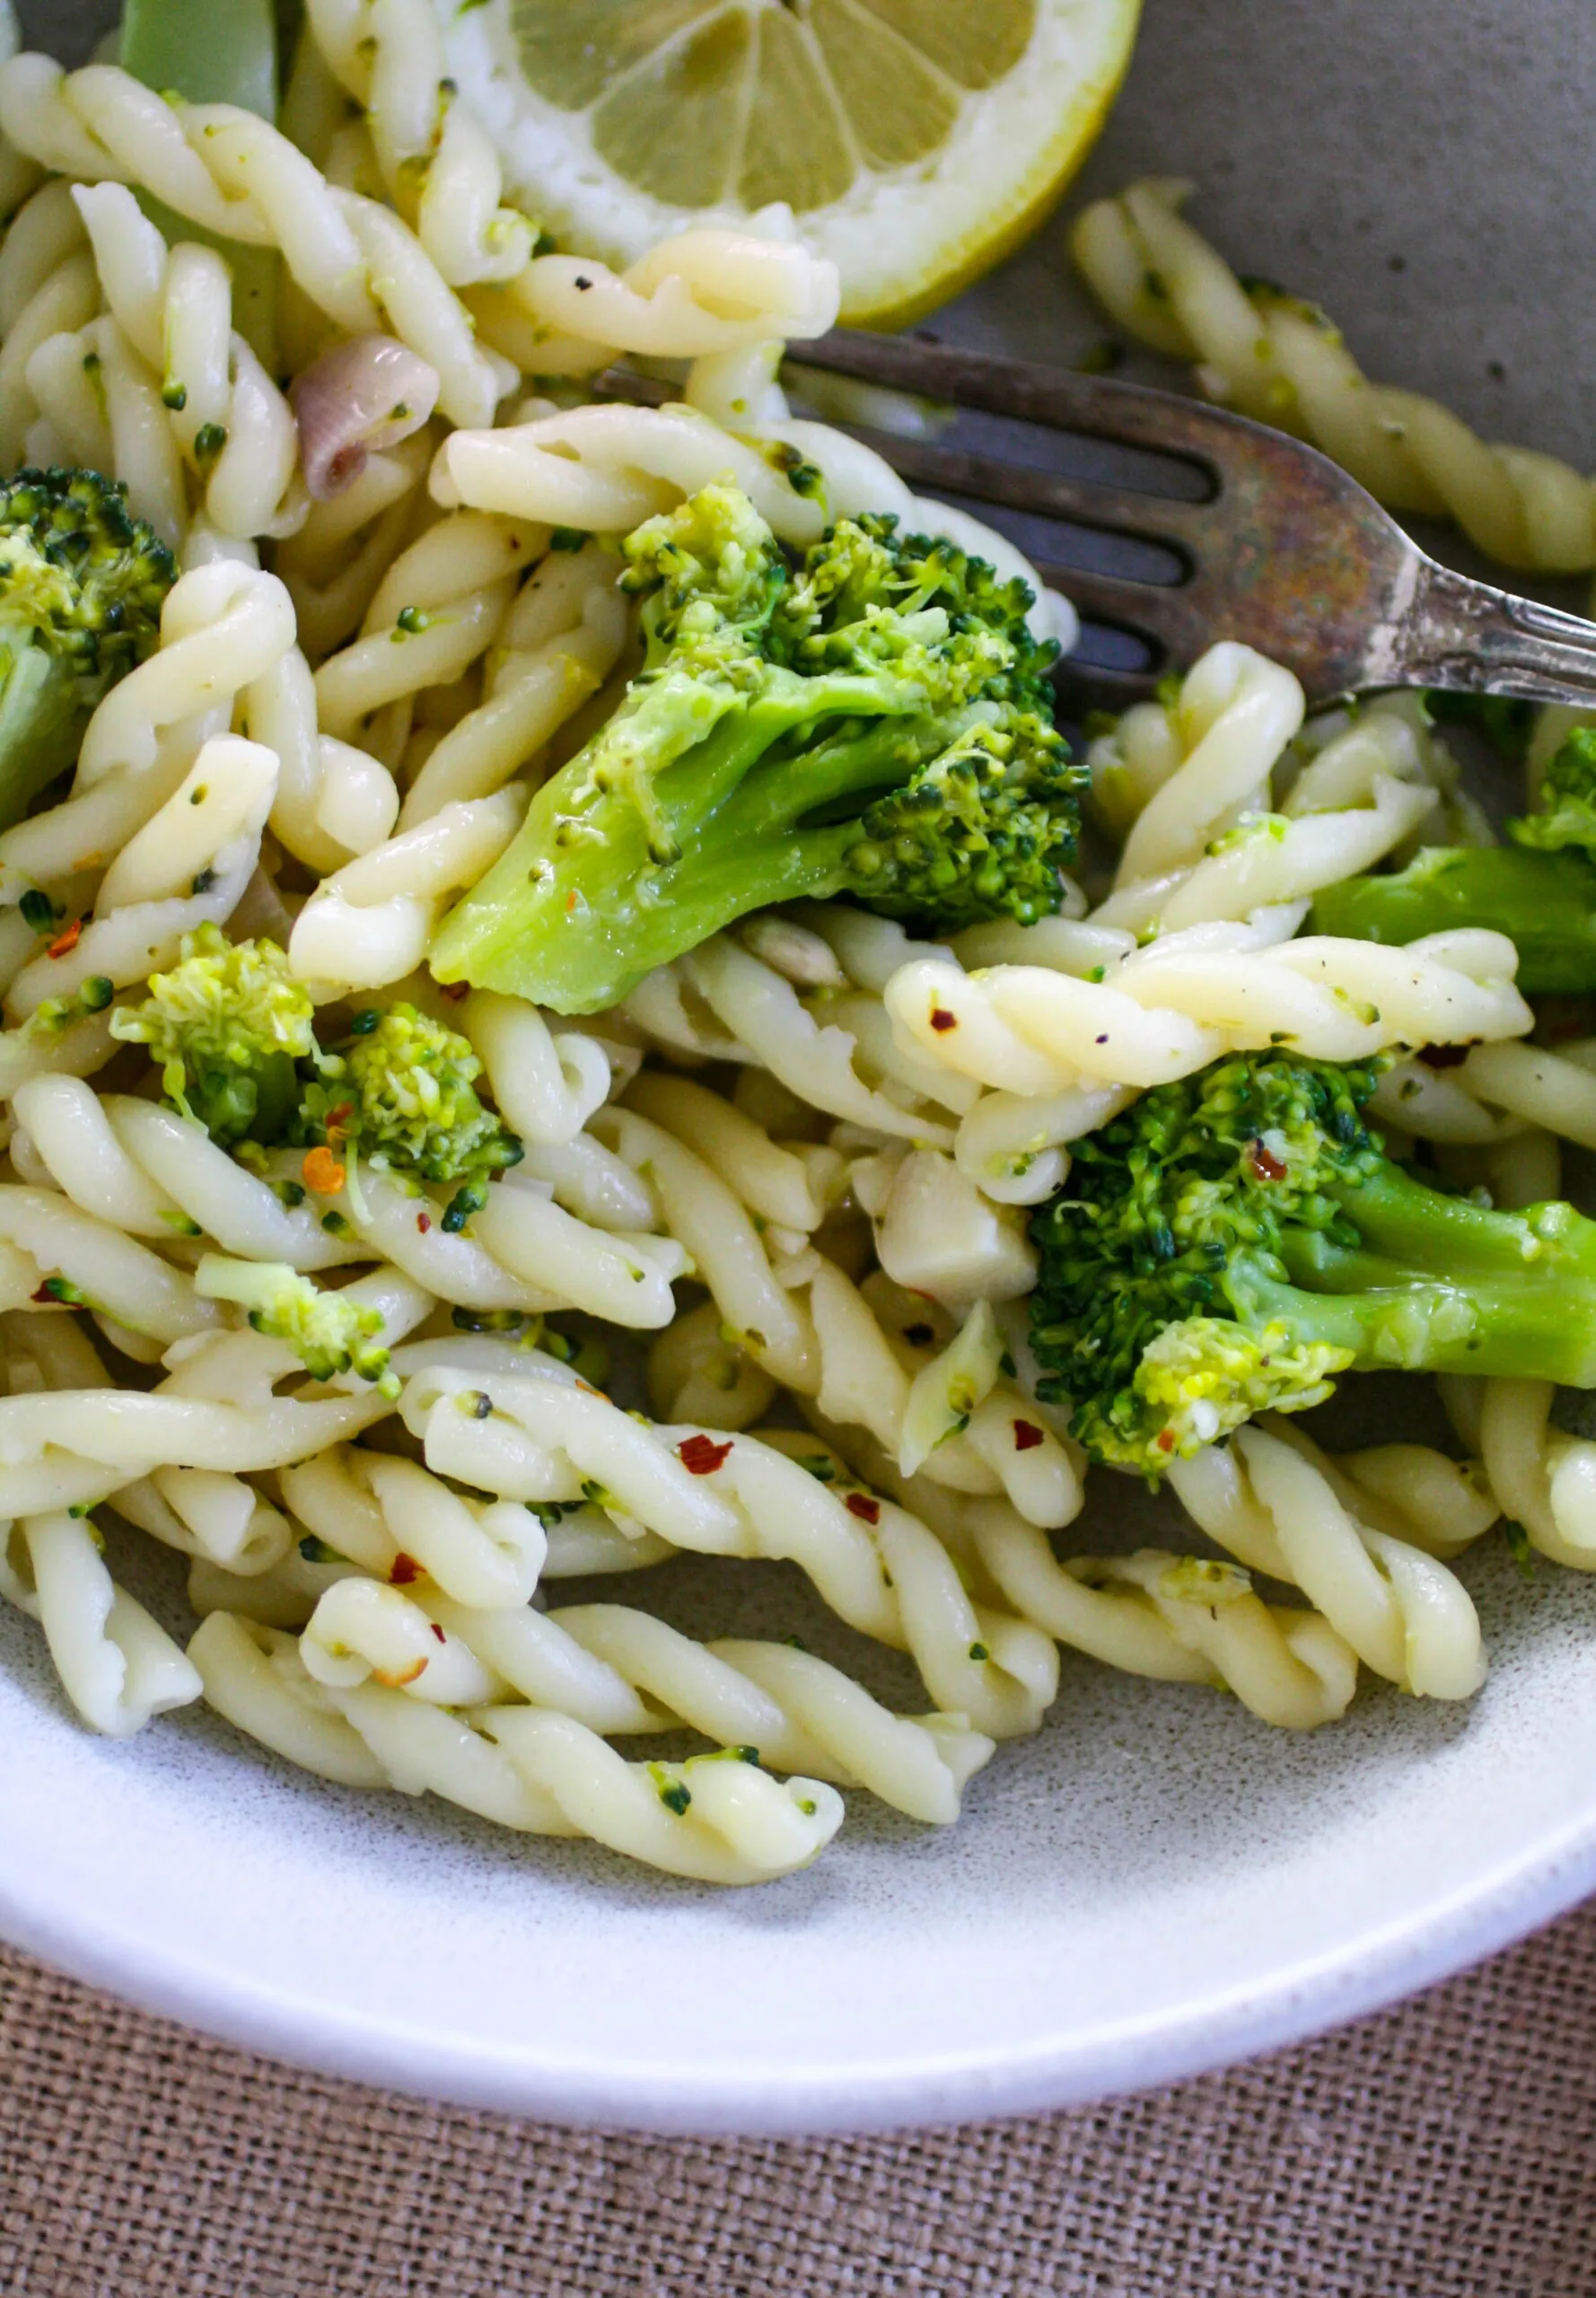 A bowl of spiral pasta with broccoli florets tossed with it.